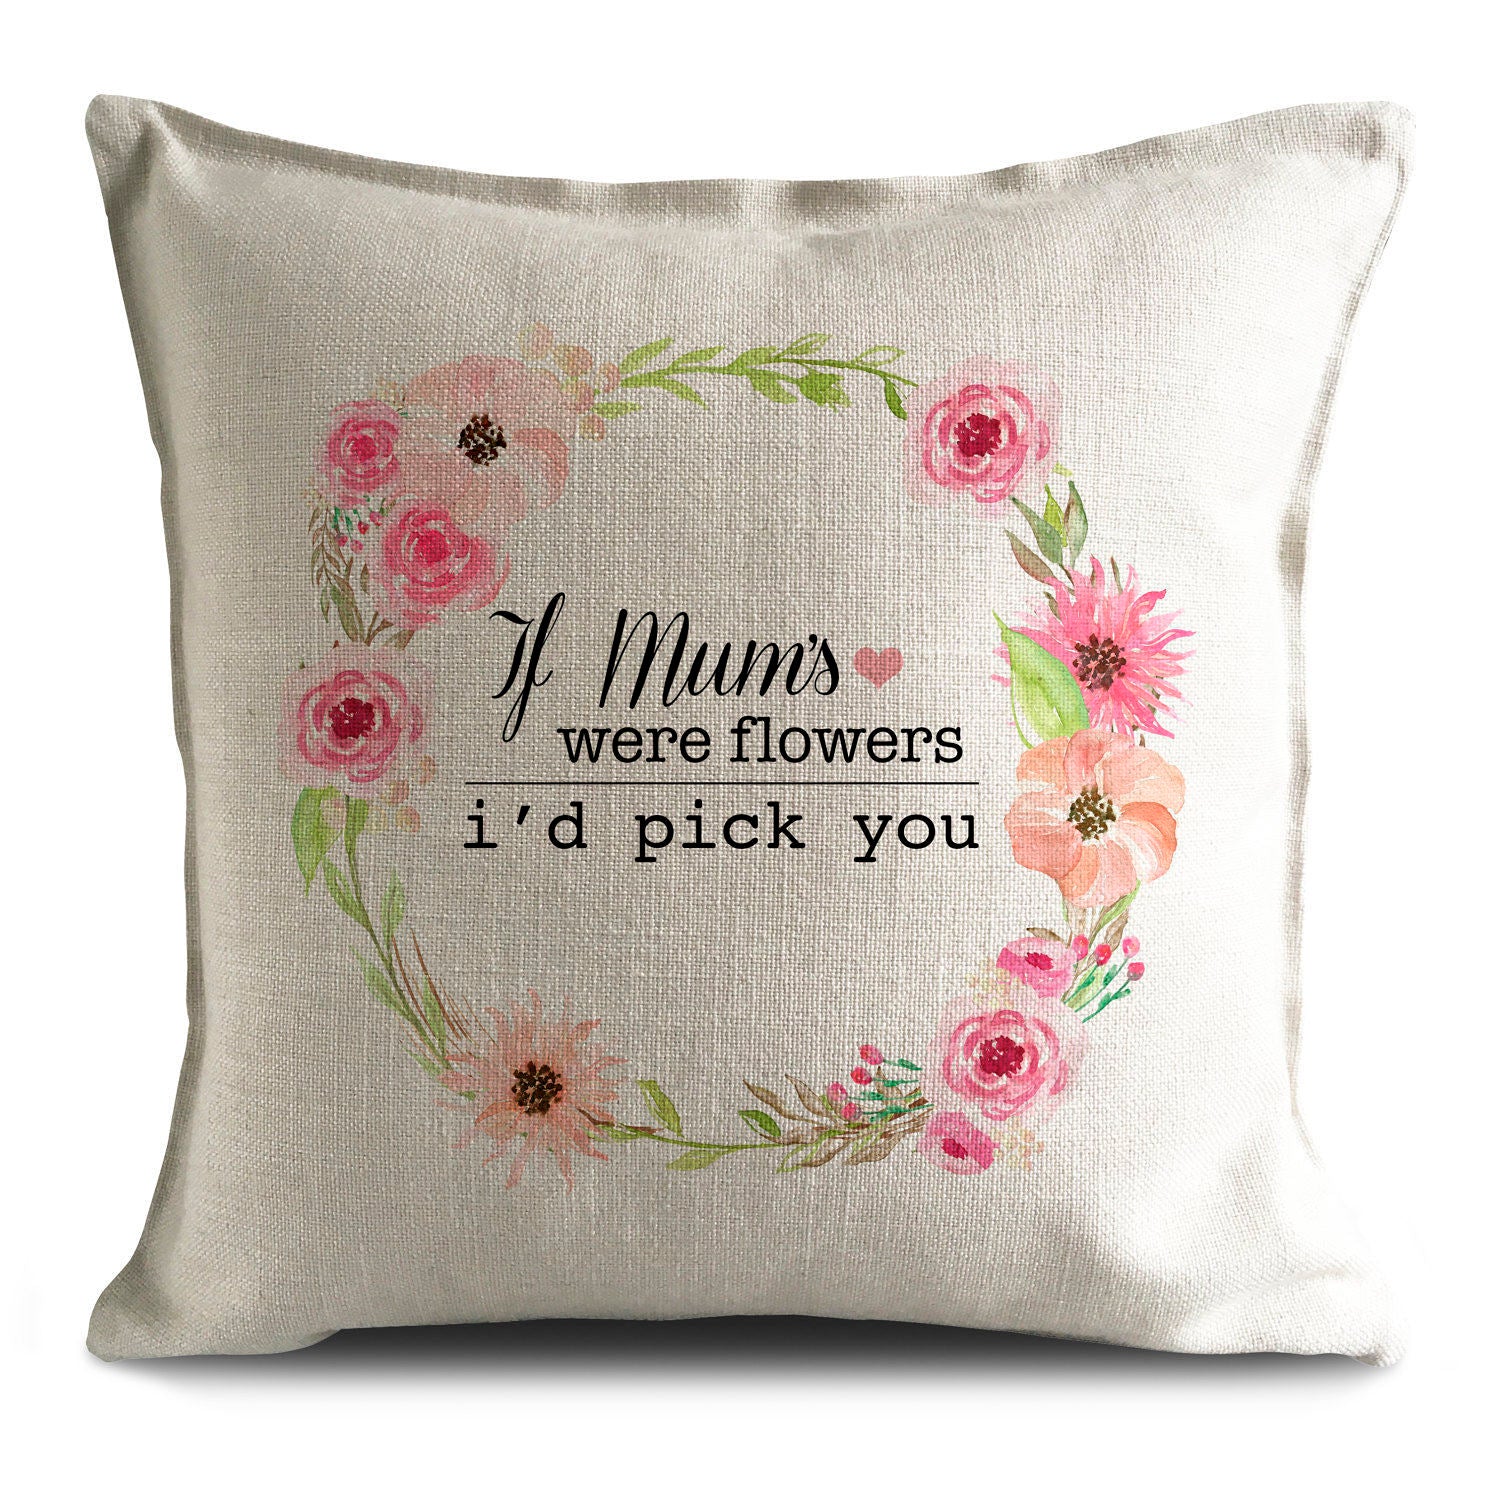 Mothers Day Cushion Cover Gift if mums were flowers